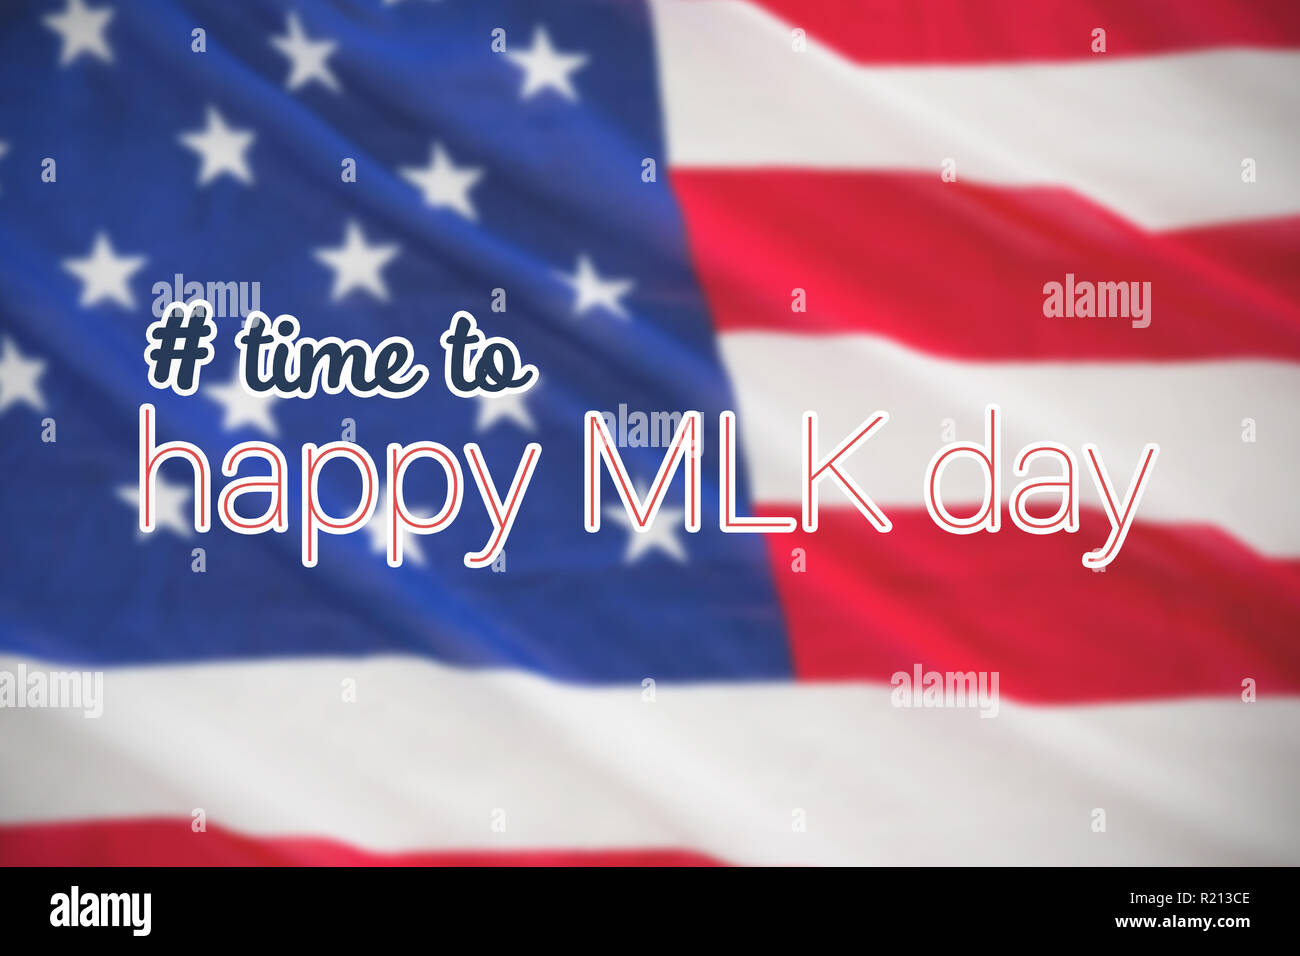 Composite image of # time to happy mlk day Stock Photo